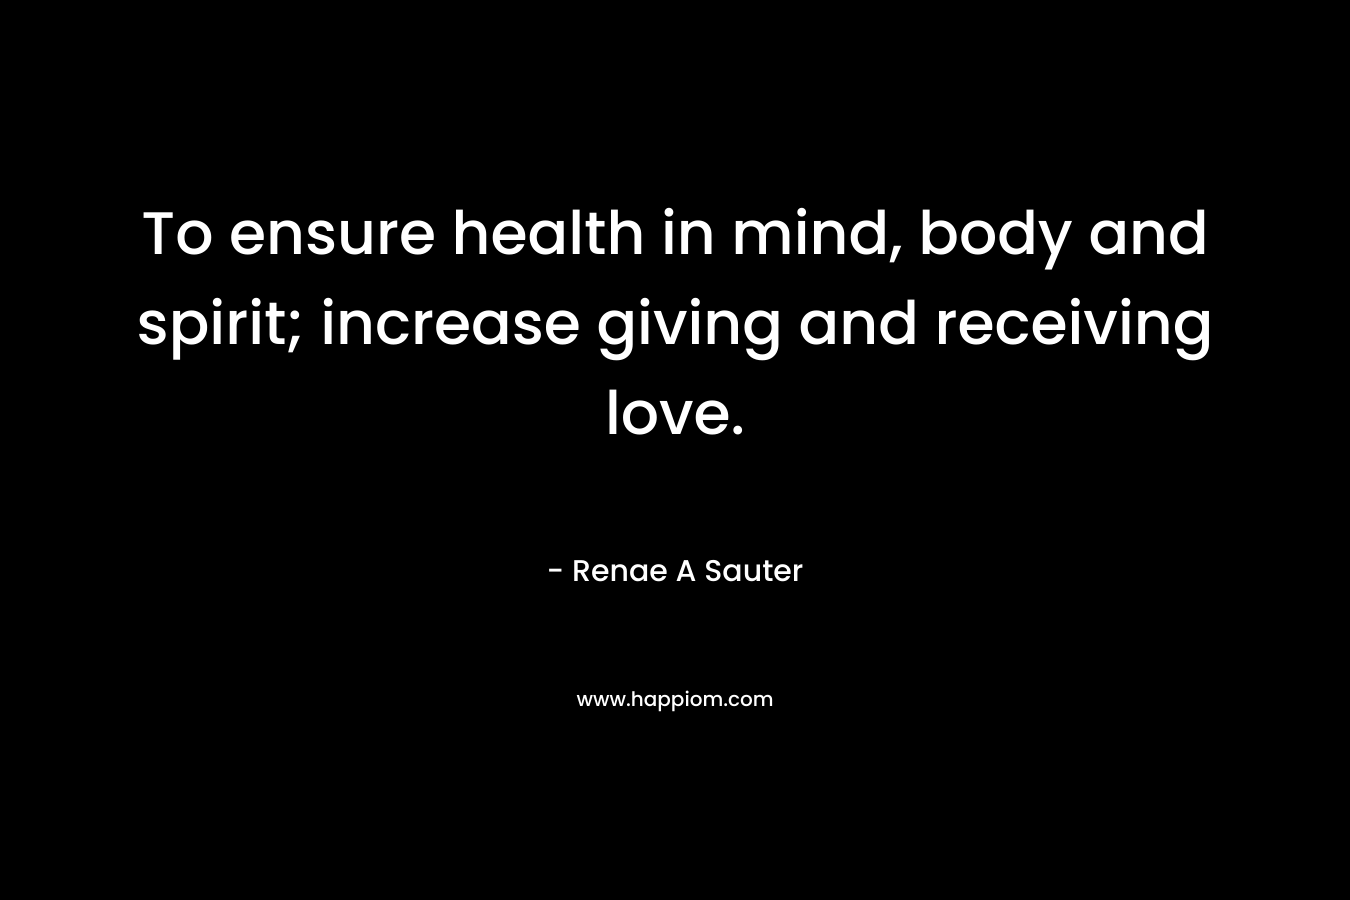 To ensure health in mind, body and spirit; increase giving and receiving love.